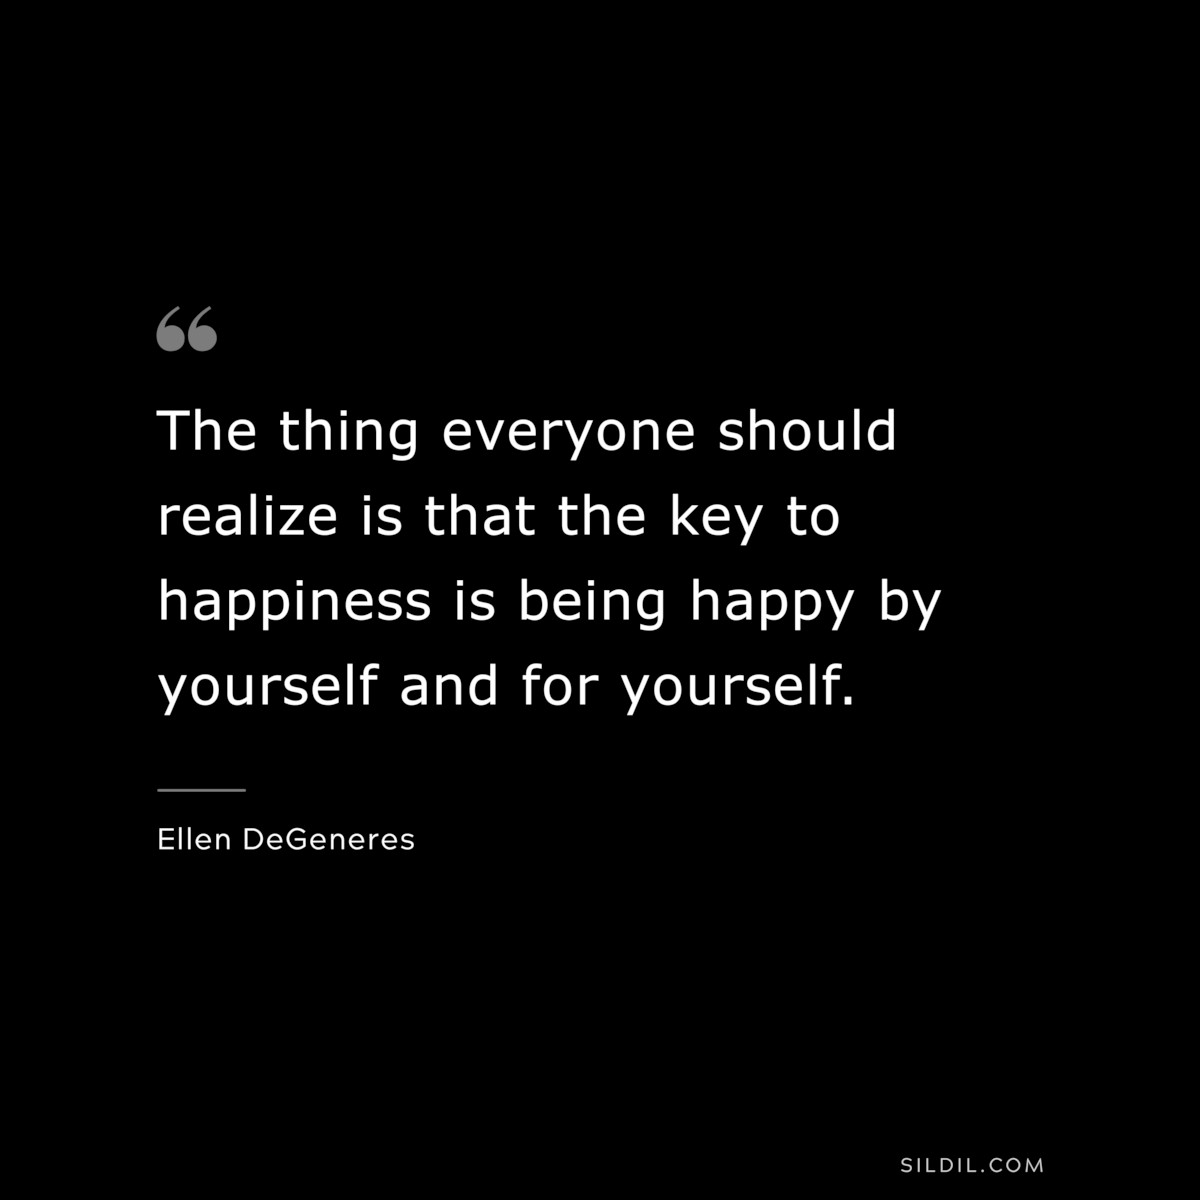 The thing everyone should realize is that the key to happiness is being happy by yourself and for yourself. ― Ellen DeGeneres